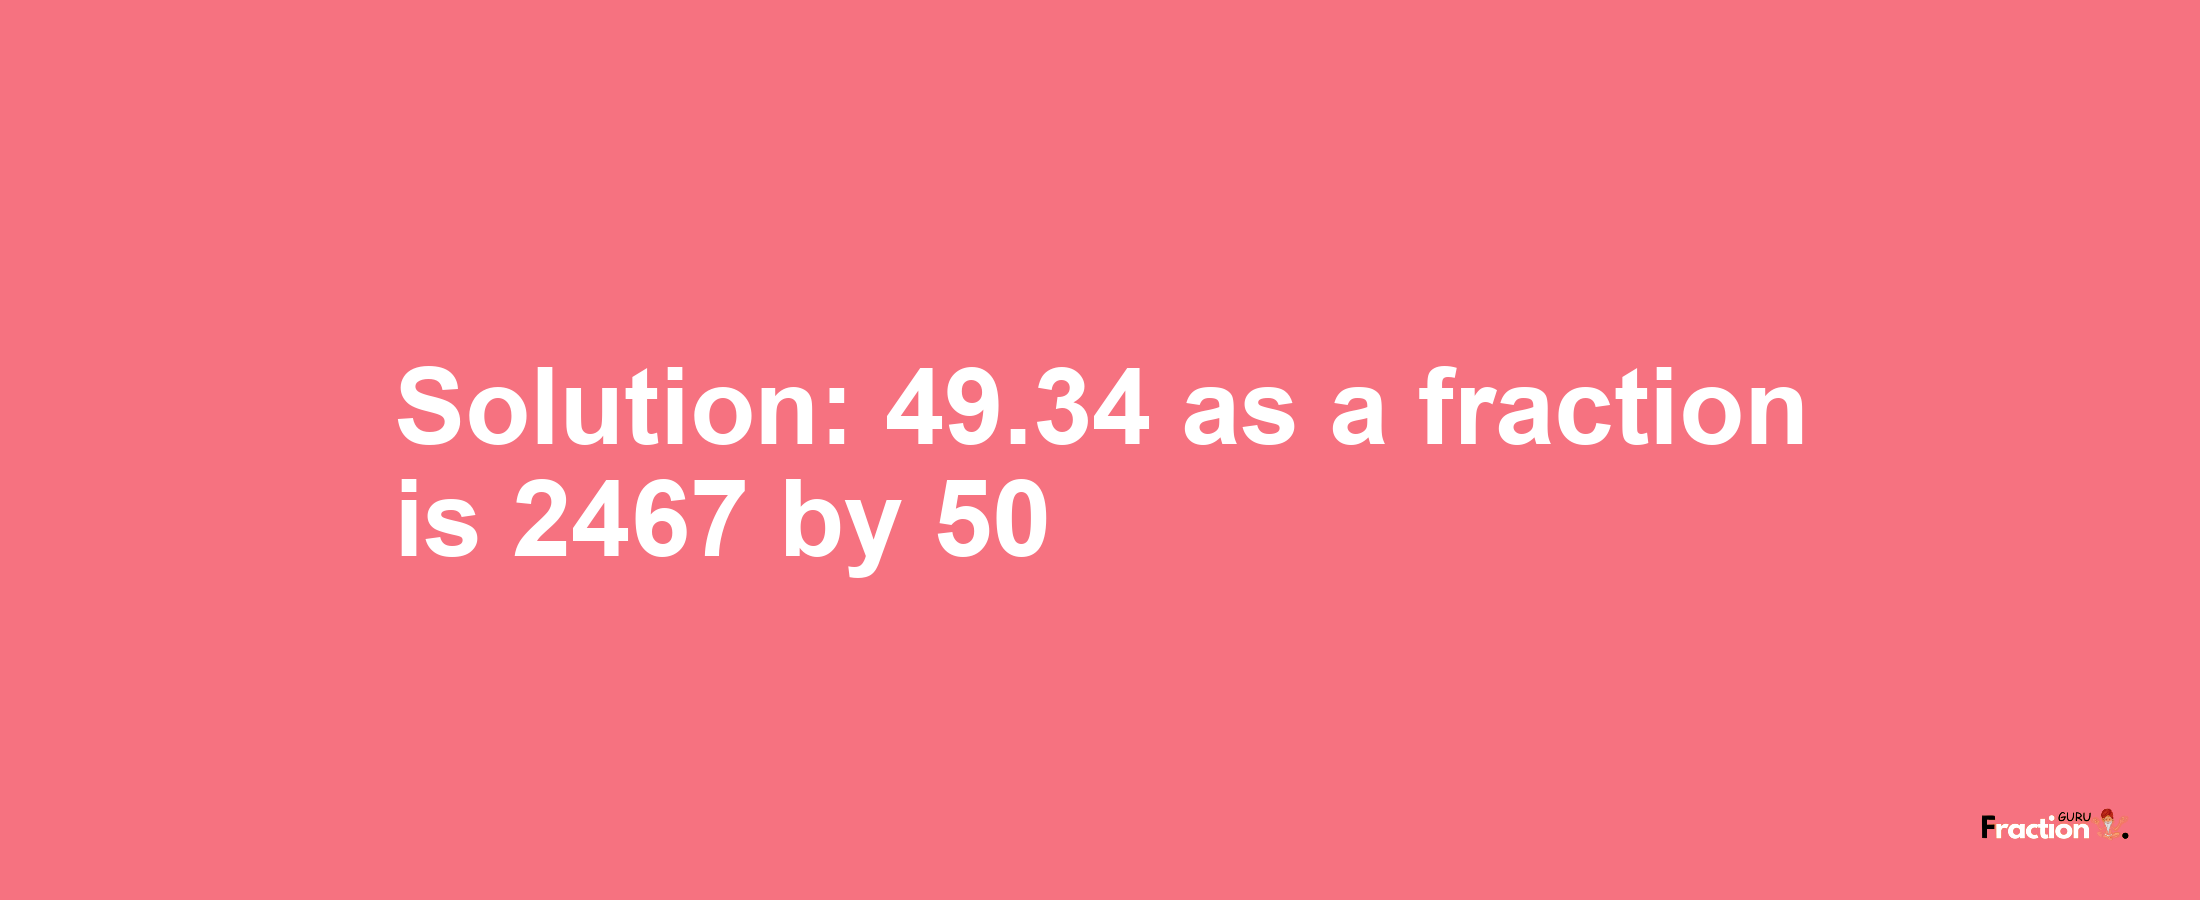 Solution:49.34 as a fraction is 2467/50